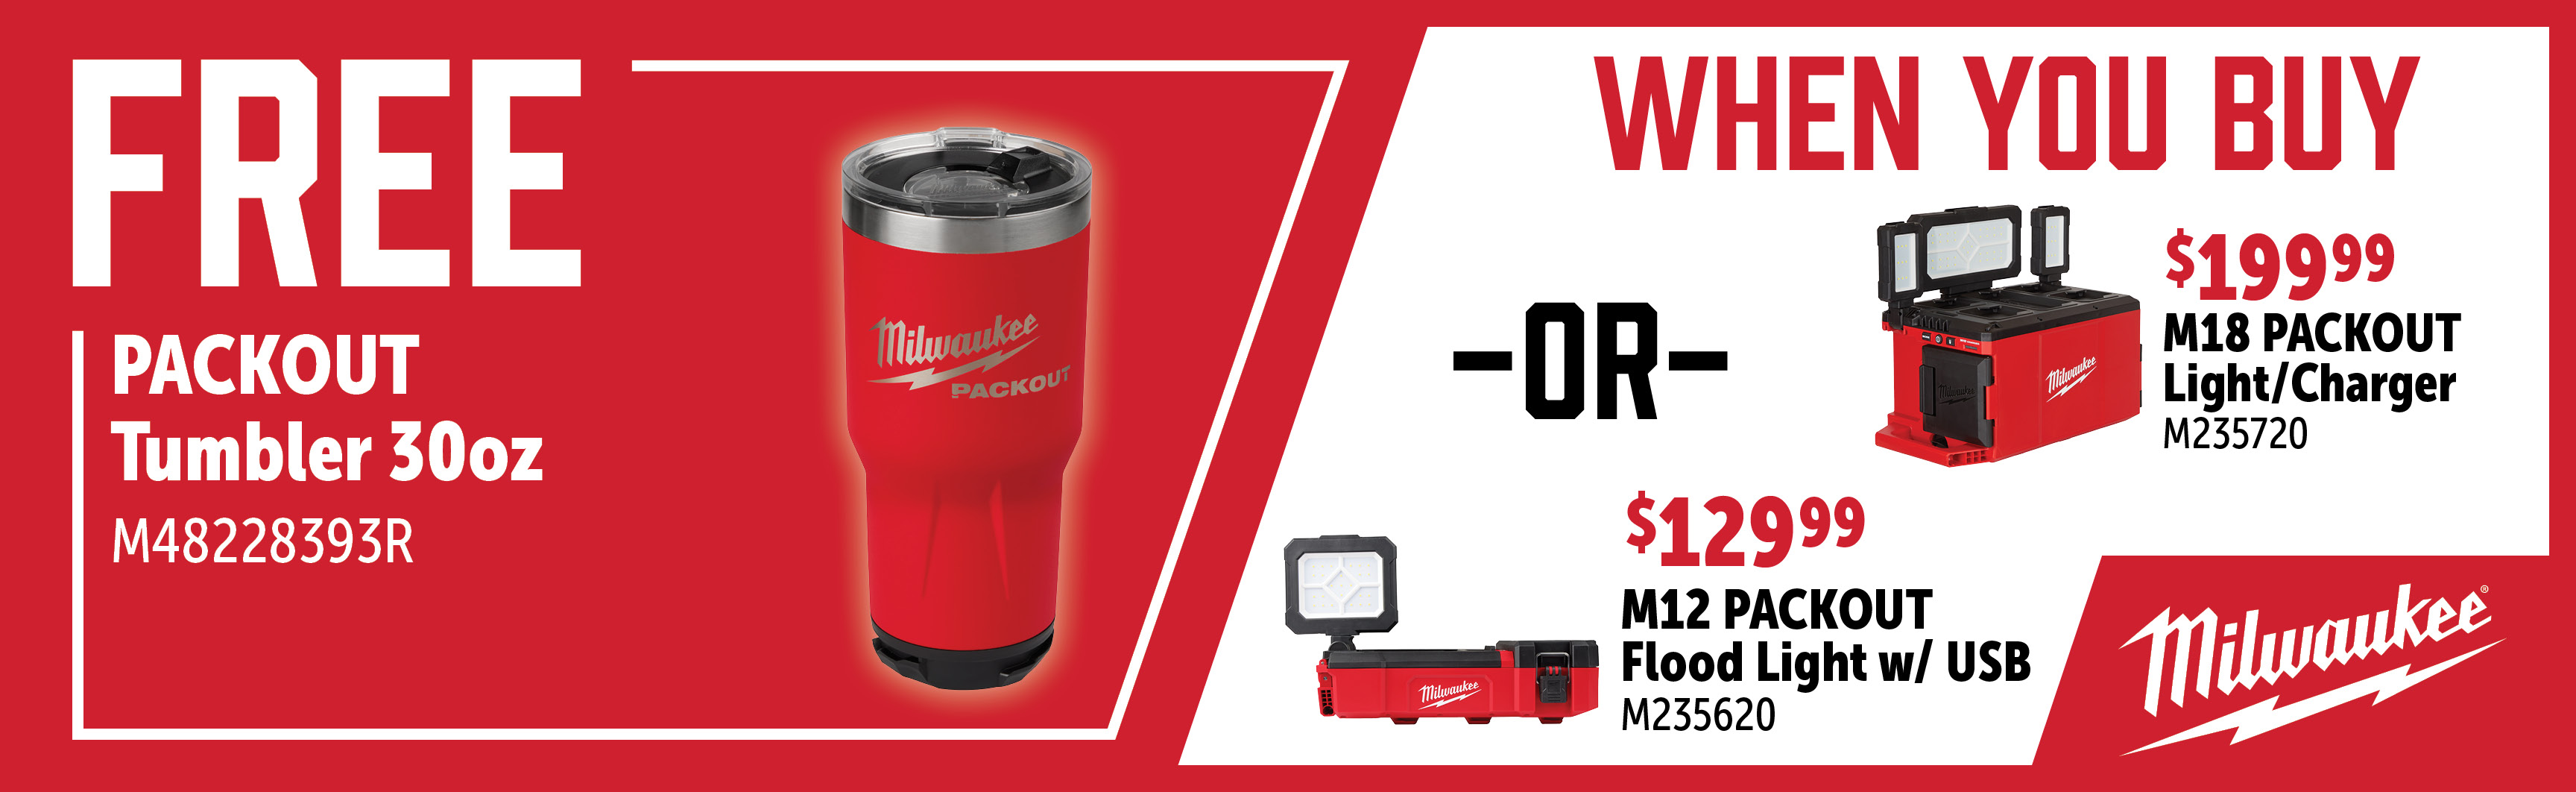 Milwaukee Feb-Apr: Buy an M235620 or M235720 and Get a FREE M48228393R